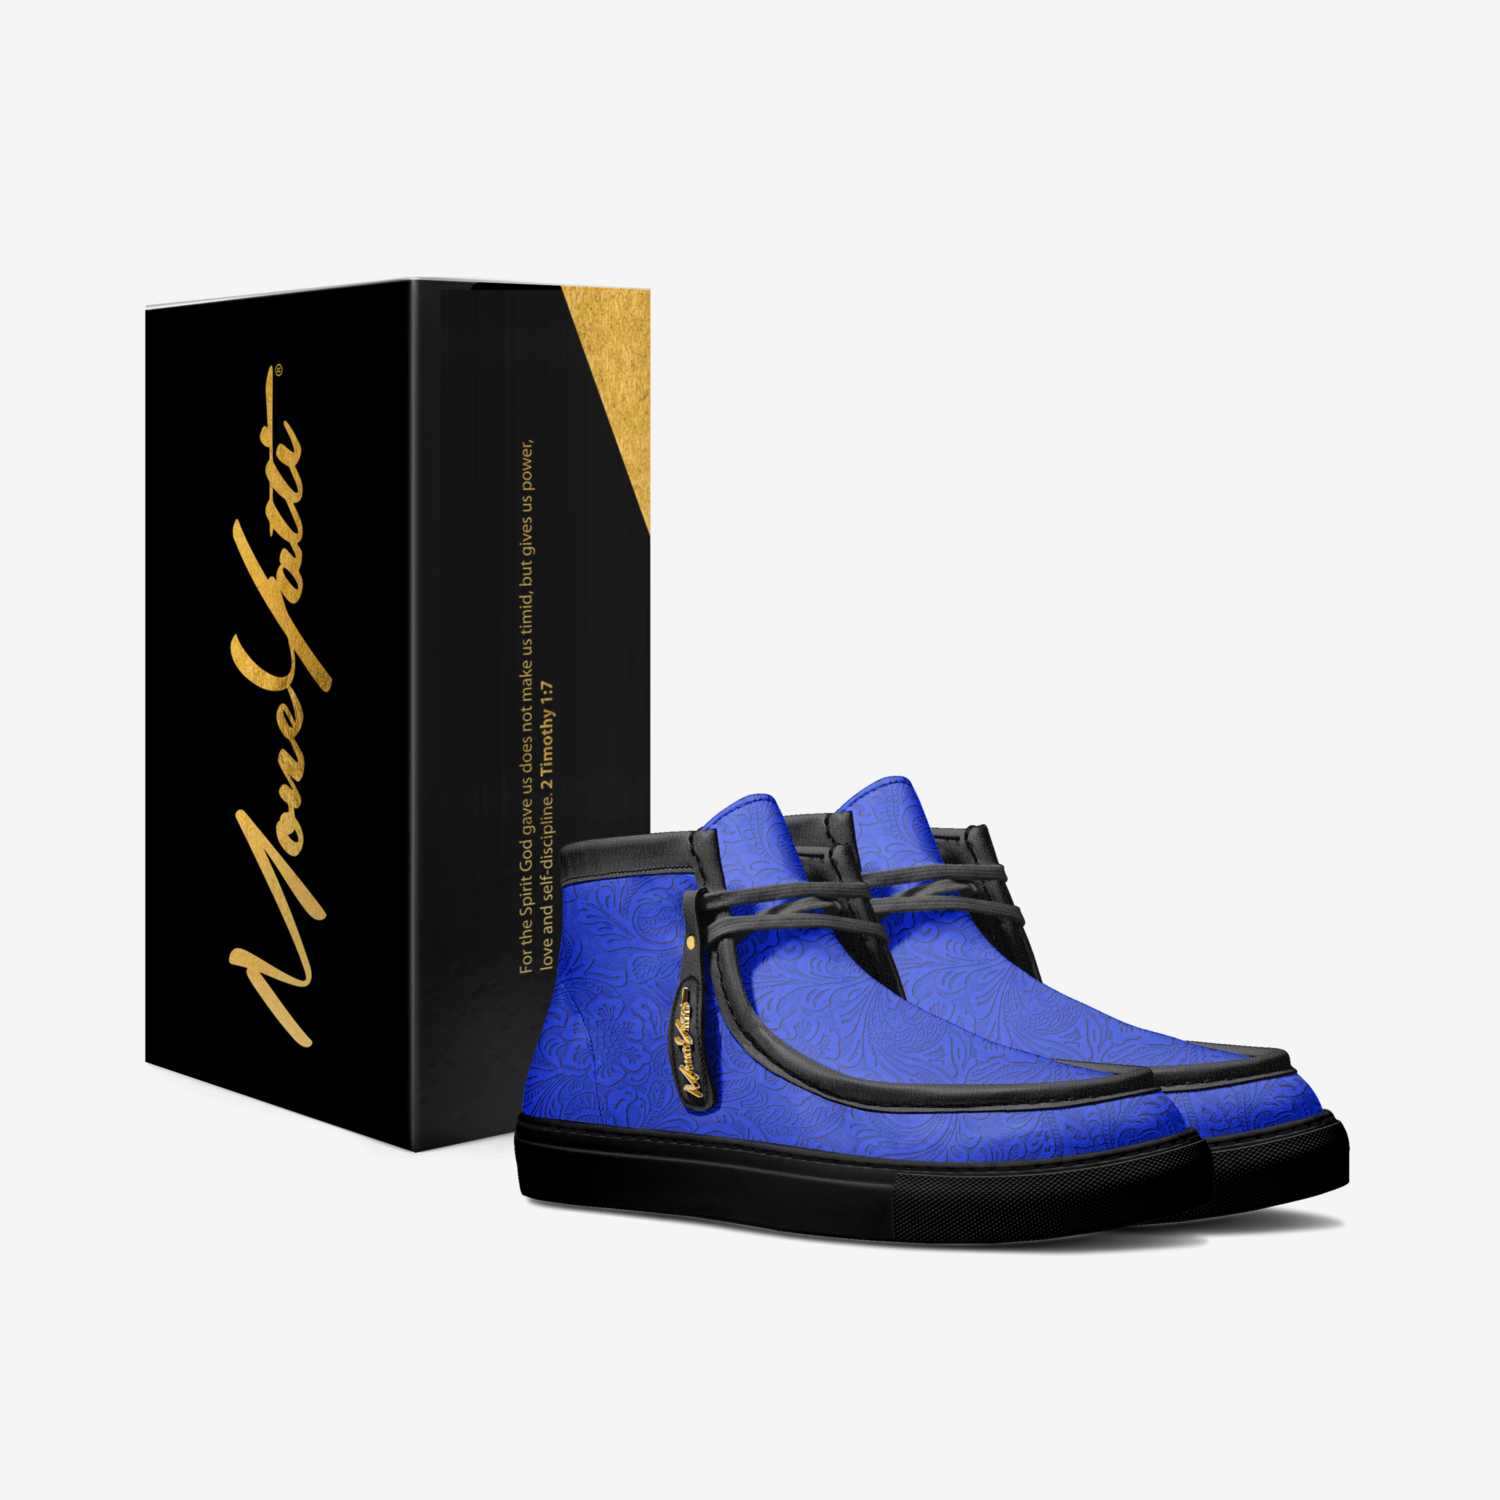 LUX 28 custom made in Italy shoes by Moneyatti Brand | Box view